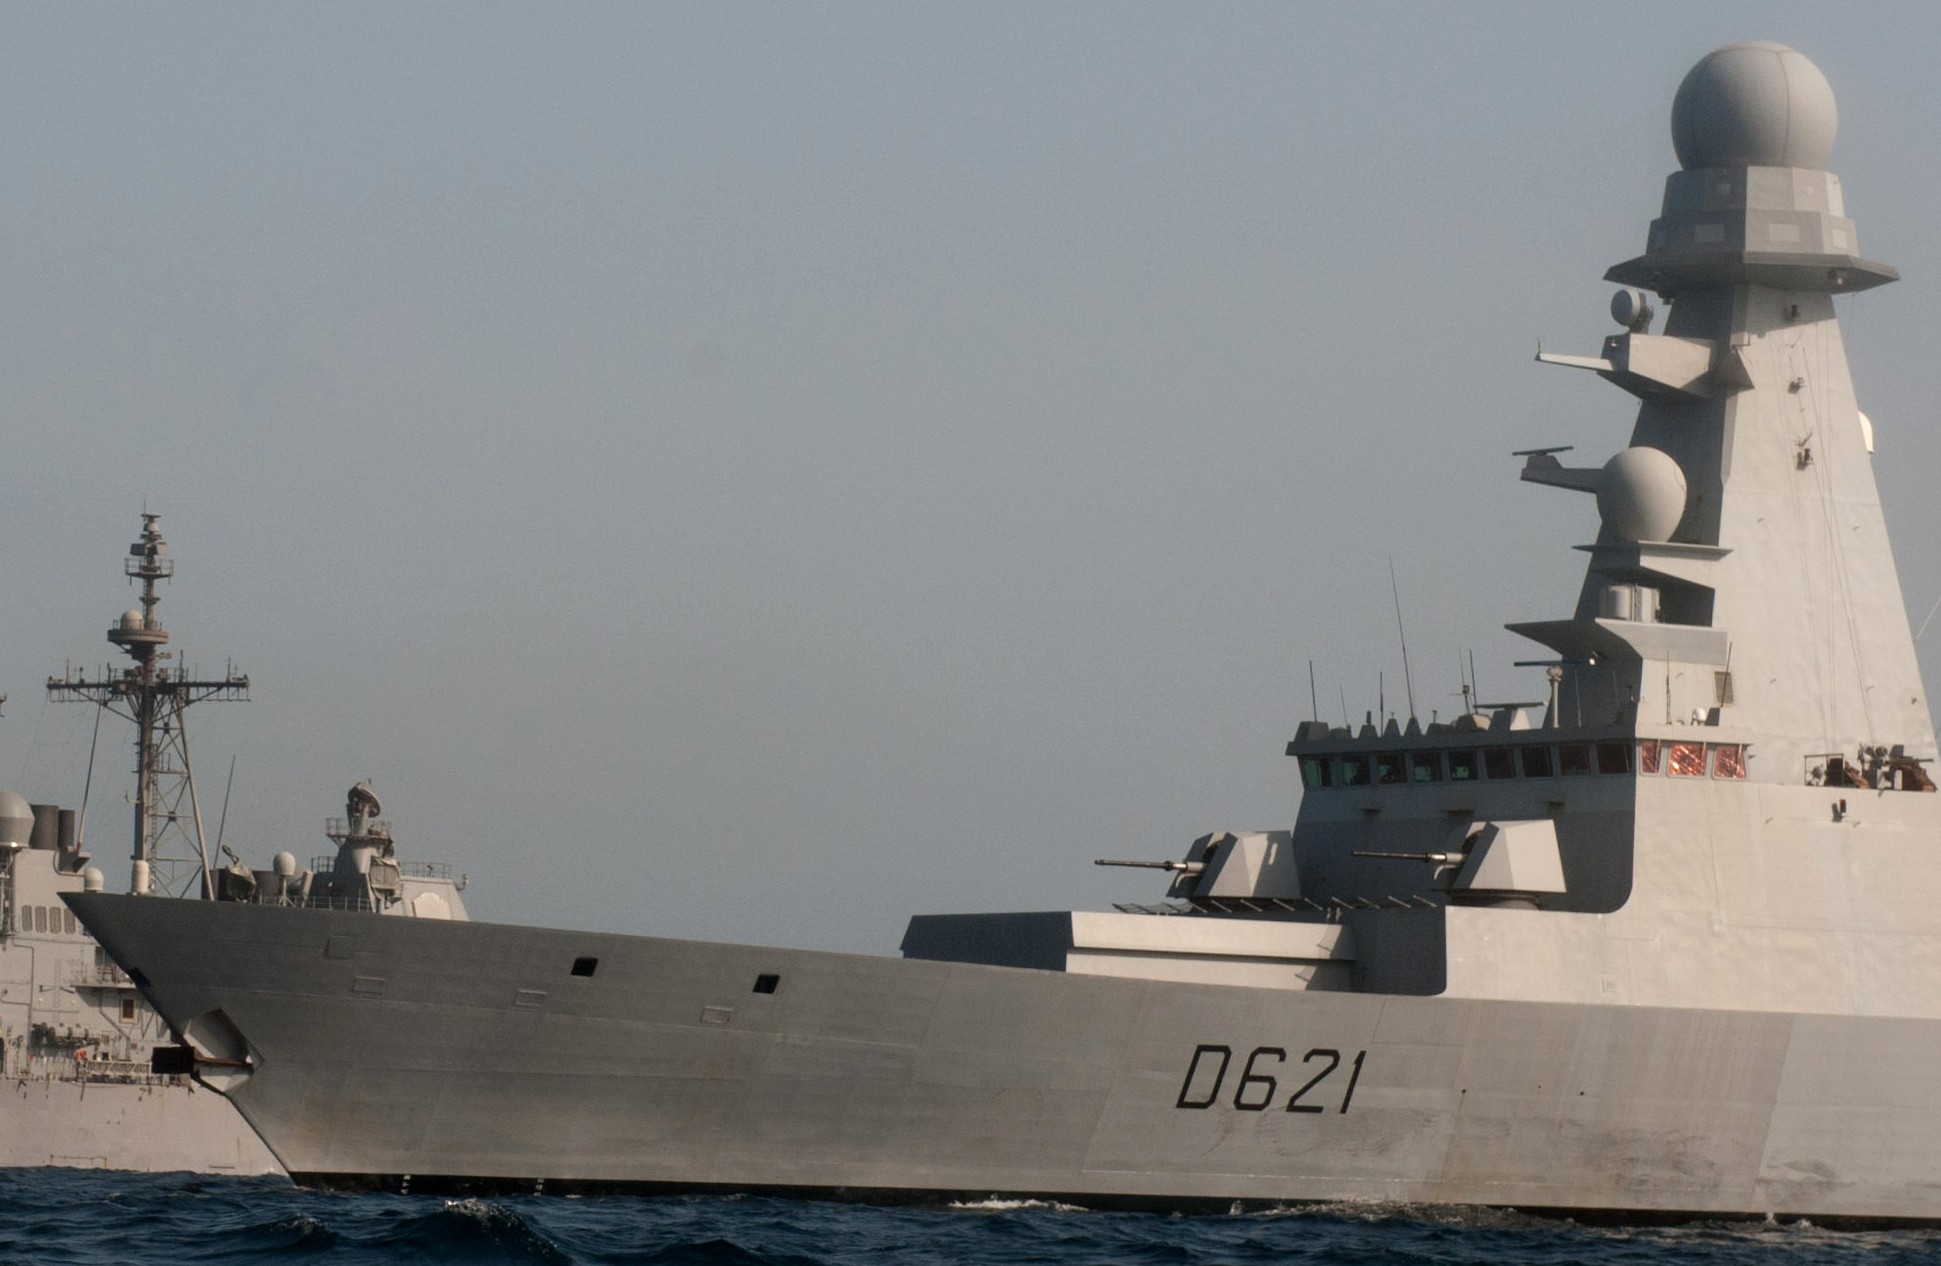 d-621 fs chevalier paul forbin horizon class guided missile frigate anti-air-warfare aaw ffgh french navy marine nationale 13